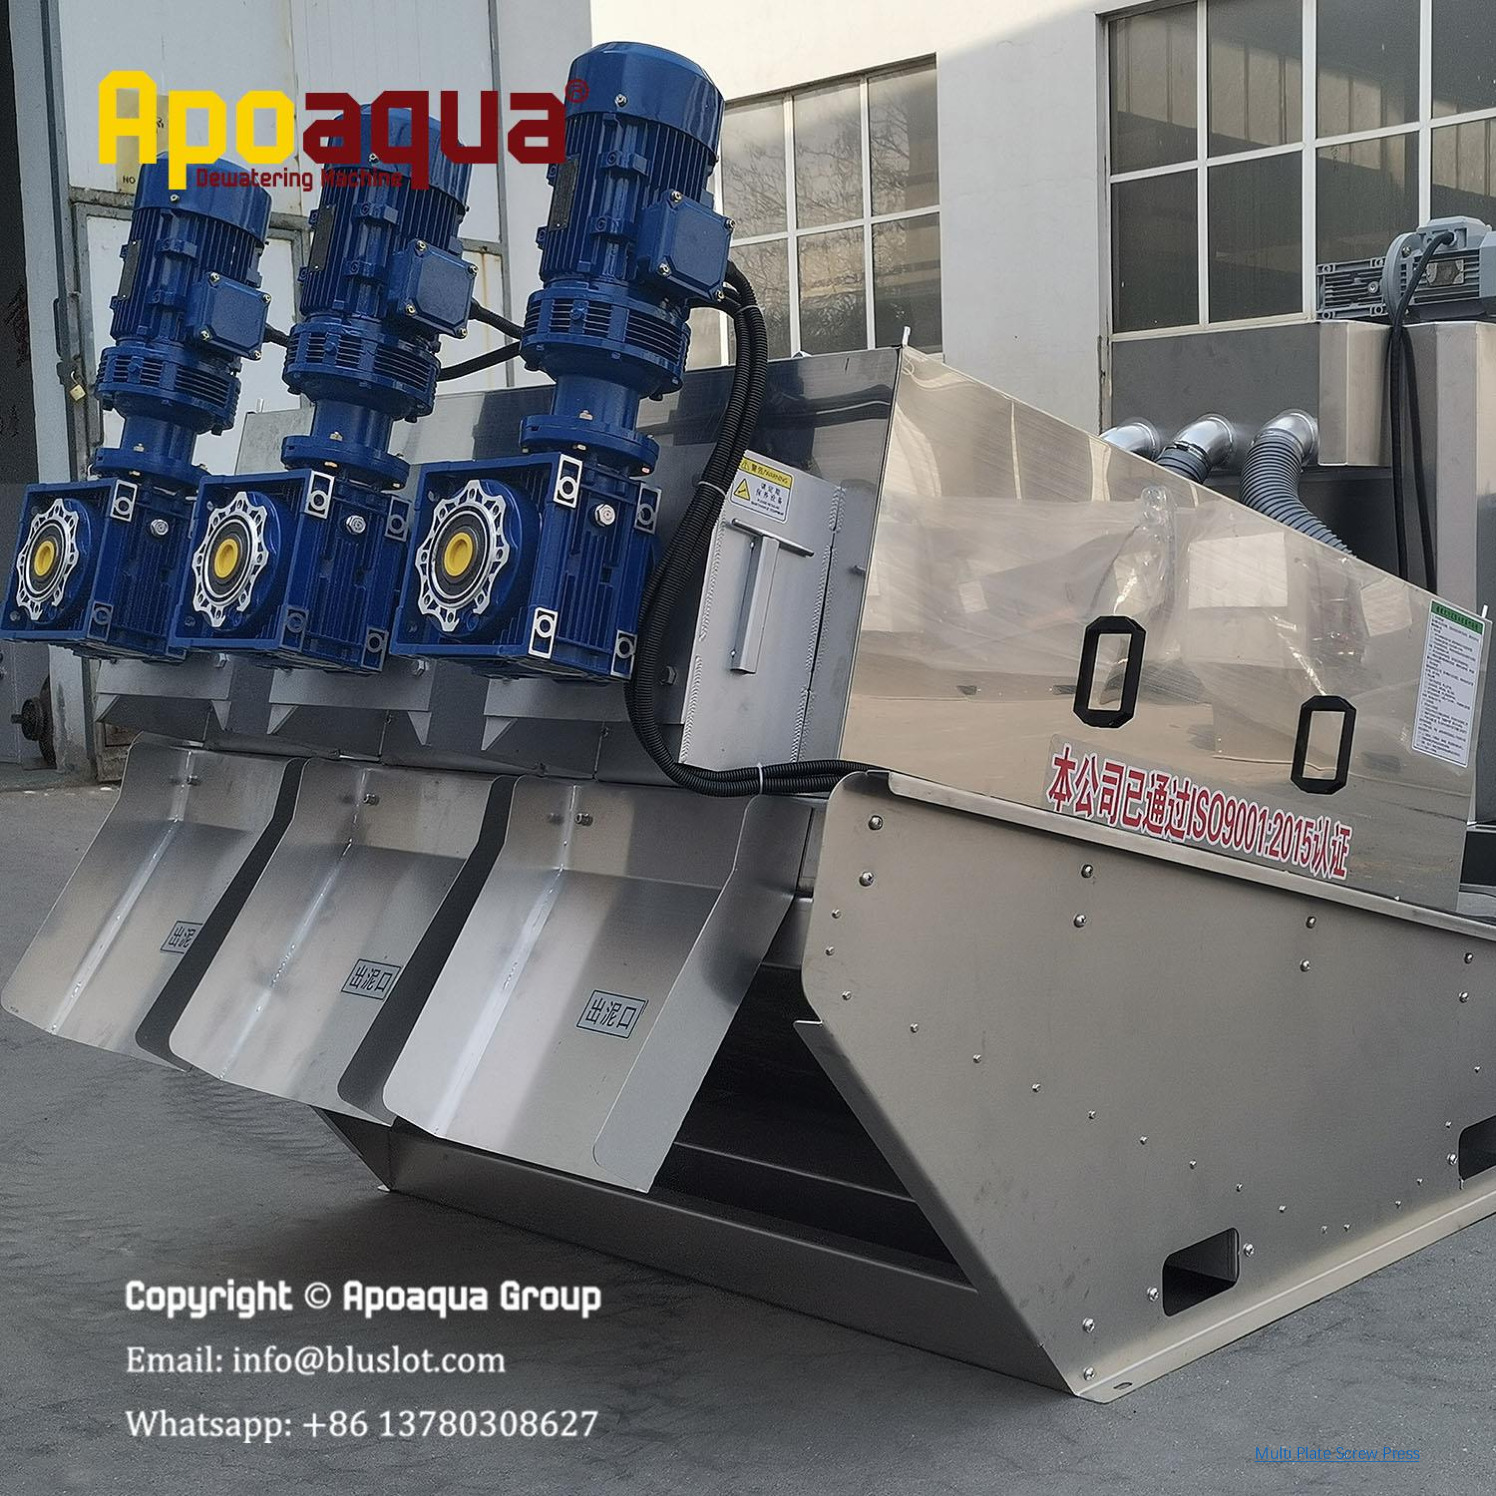 Multi-disc screw press has significant advantages in municipal sewage treatment.First of all, the multi-disc screw press has a higher processing...